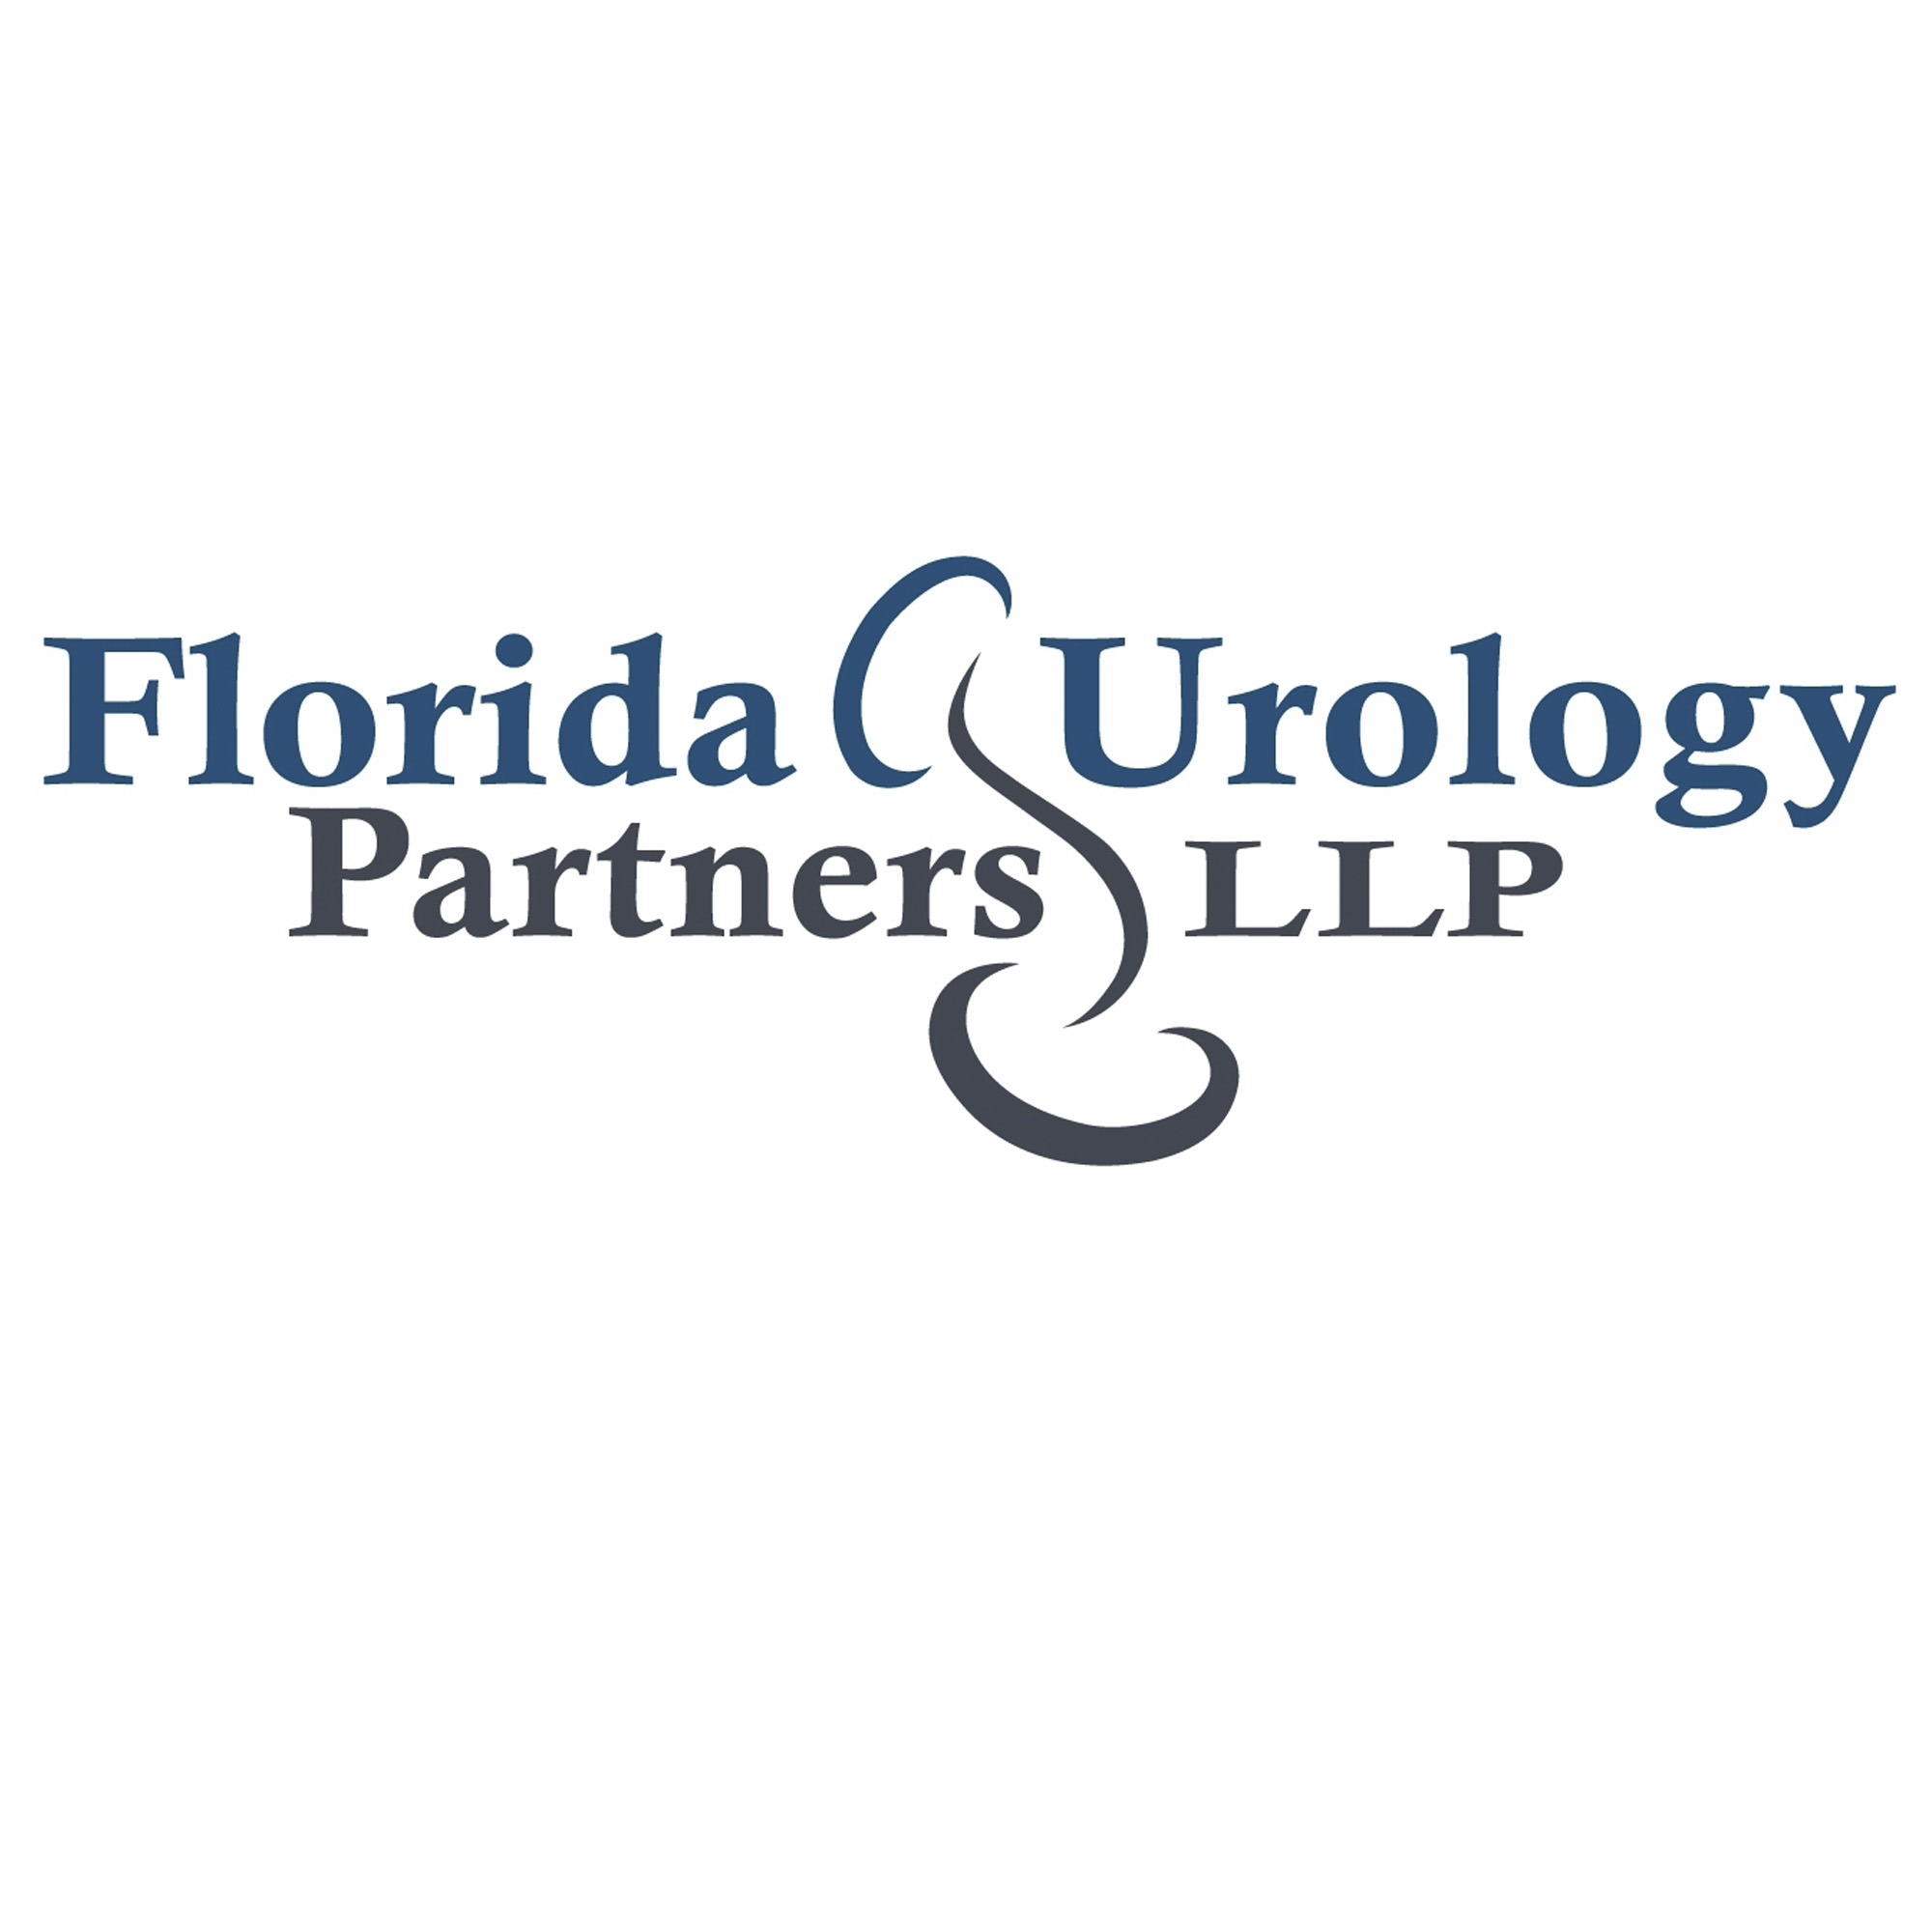 Tampa General Hospital and Florida Urology Partners